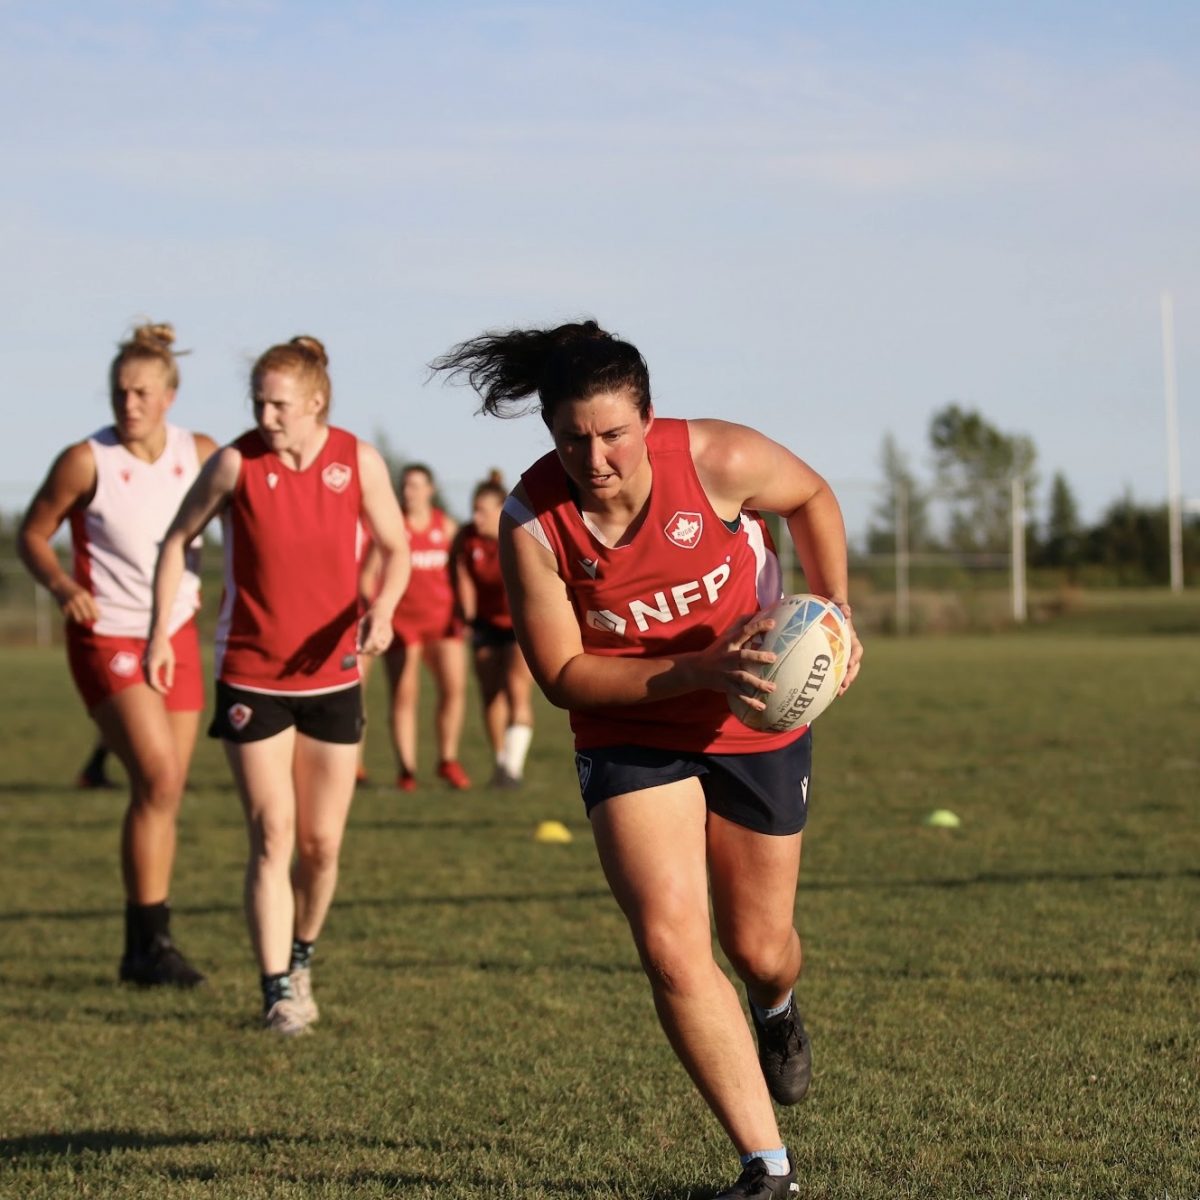 Rugby Canada's last preparation game in their training session on August 16, 2022